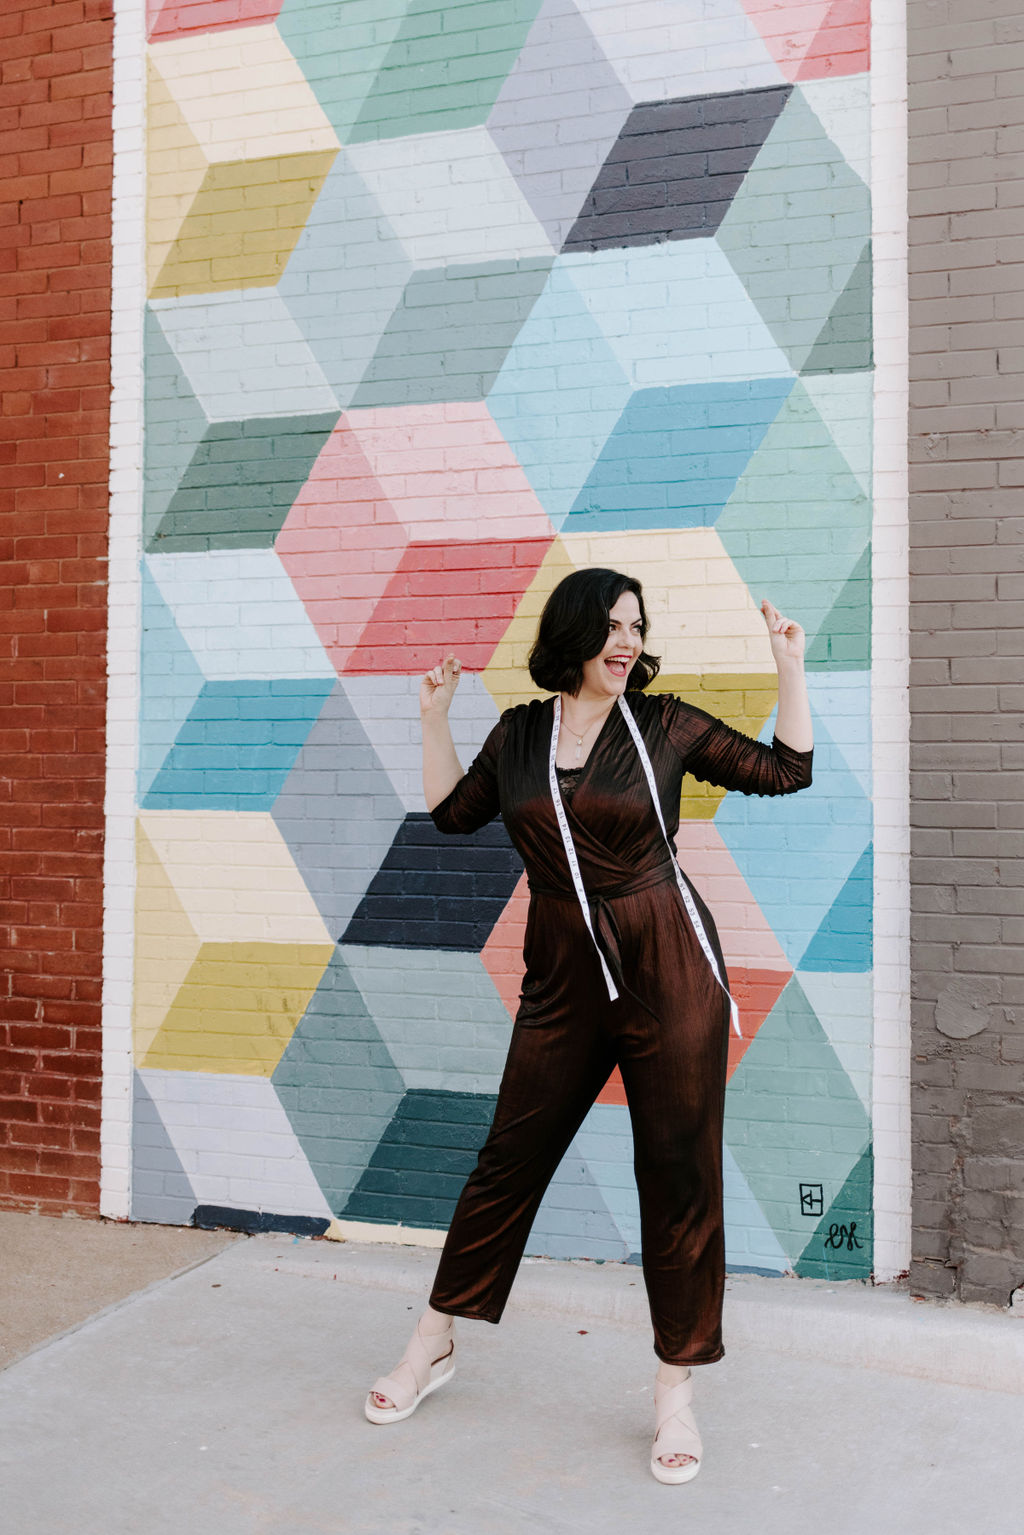 Kimmay in front of cube-painted brick wall